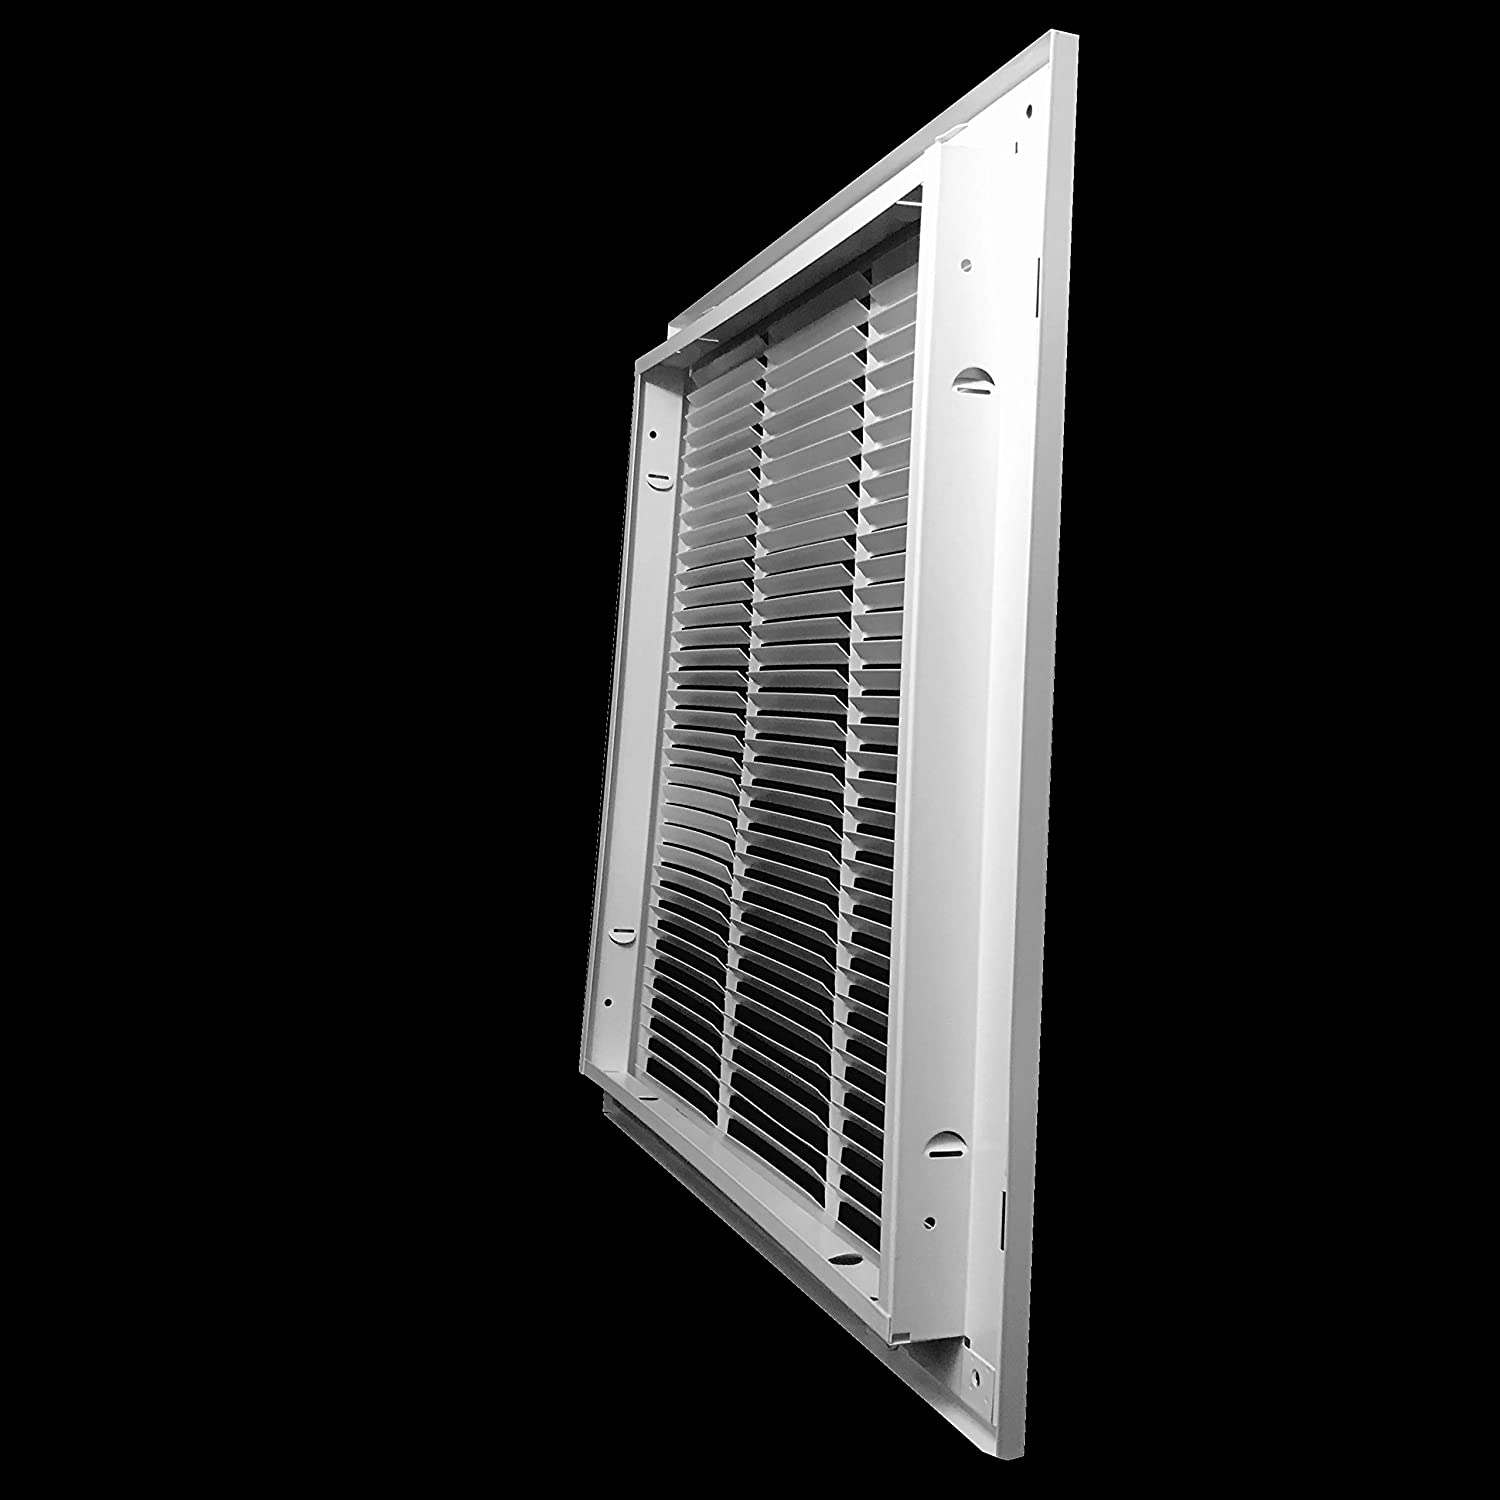 20" X 10" Duct Opening | Filter Included HD Steel Return Air Filter Grille for Sidewall and Ceiling